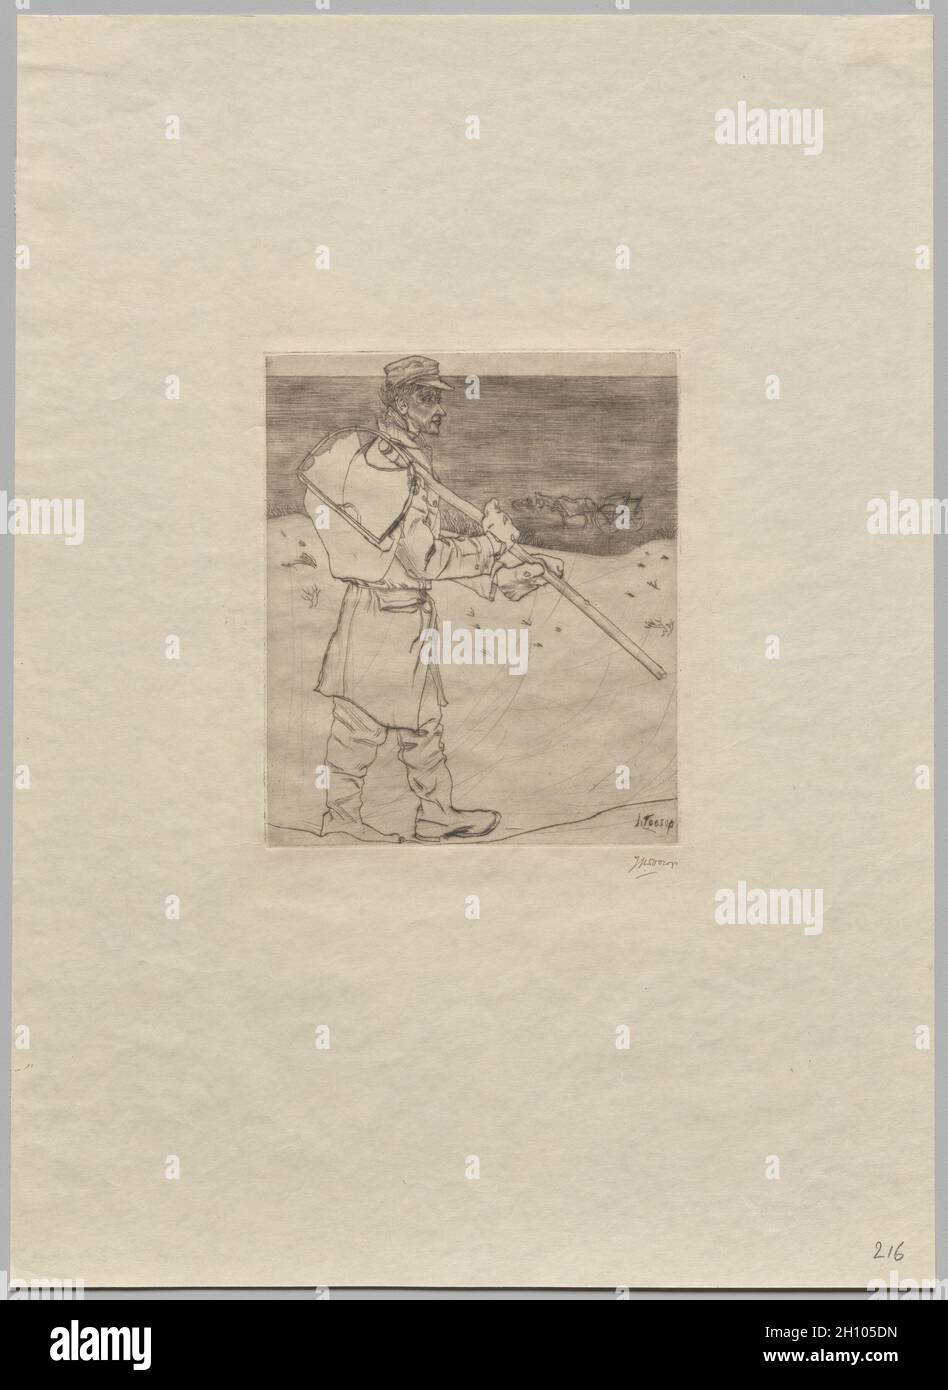 The Shell Fisherman, 1902. Jan Toorop (Dutch, 1858-1928). Drypoint; platemark: 18.5 x 15.5 cm (7 5/16 x 6 1/8 in.); sheet: 38.1 x 35 cm (15 x 13 3/4 in.).  Jan Toorop made The Shell Fisherman when he lived in Katwijk aan Zee, a small fishing village on the coast of the North Sea in the Netherlands. His interest in portraying the timeless relationship between humans and the land and sea led him to depict a shell fisherman, presented in profile against the dunes and the sea, carrying his scoop-net on a long pole over his shoulder. His deeply weathered features are evidence of his rugged labor. Stock Photo